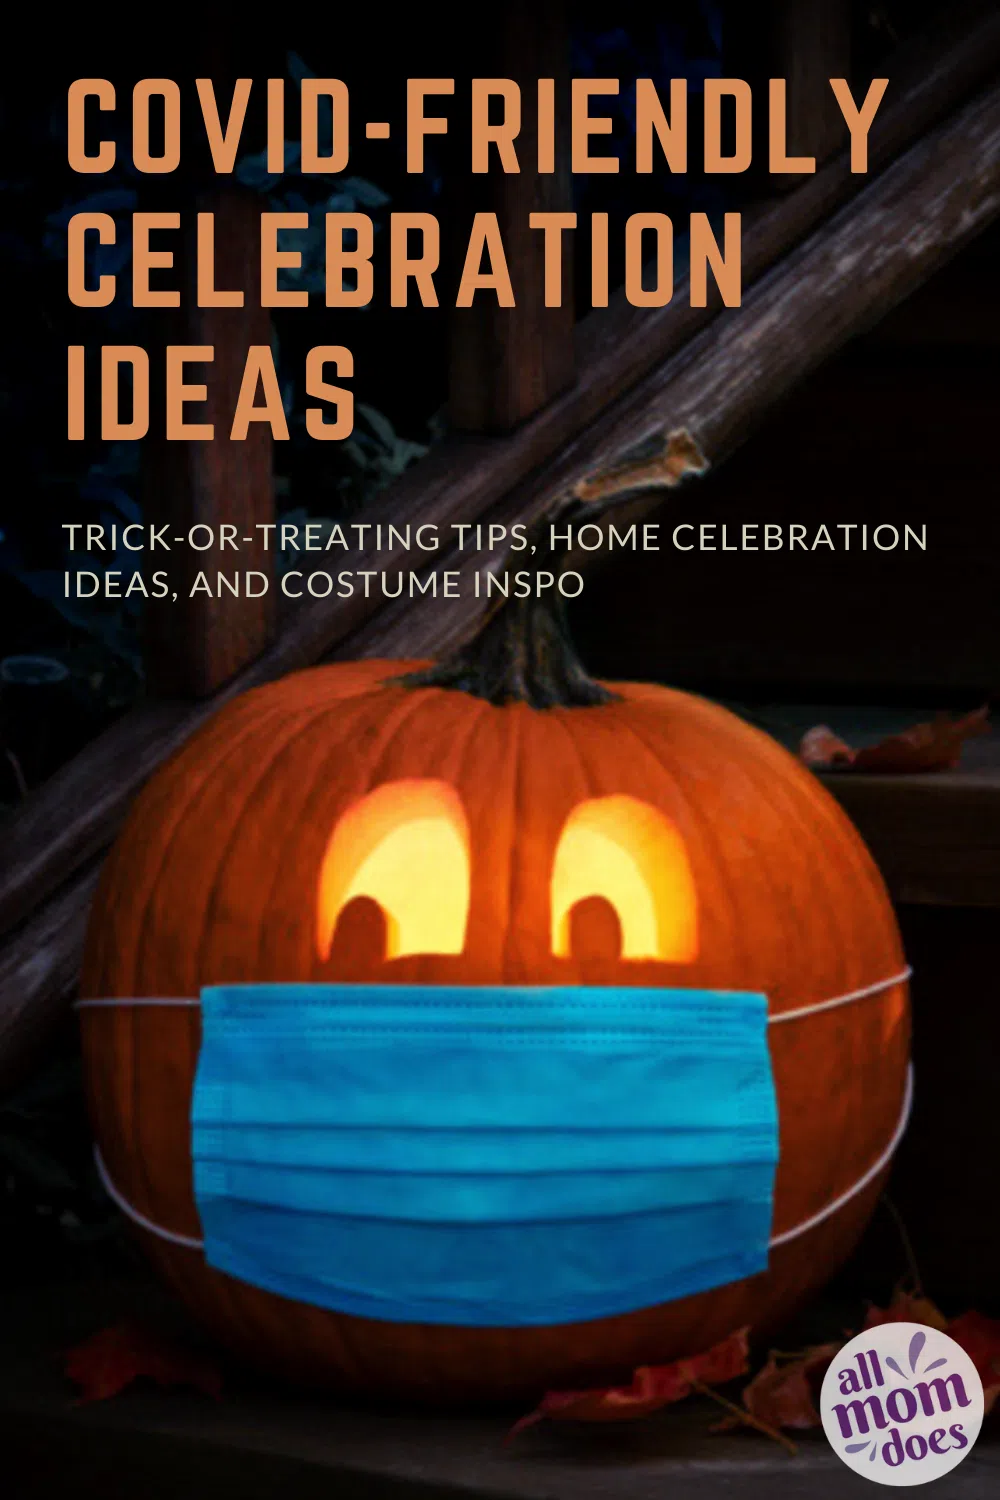 Safe Halloween celebrations during COVID; home celebrating, trick or treating tips, COVID costume ideas